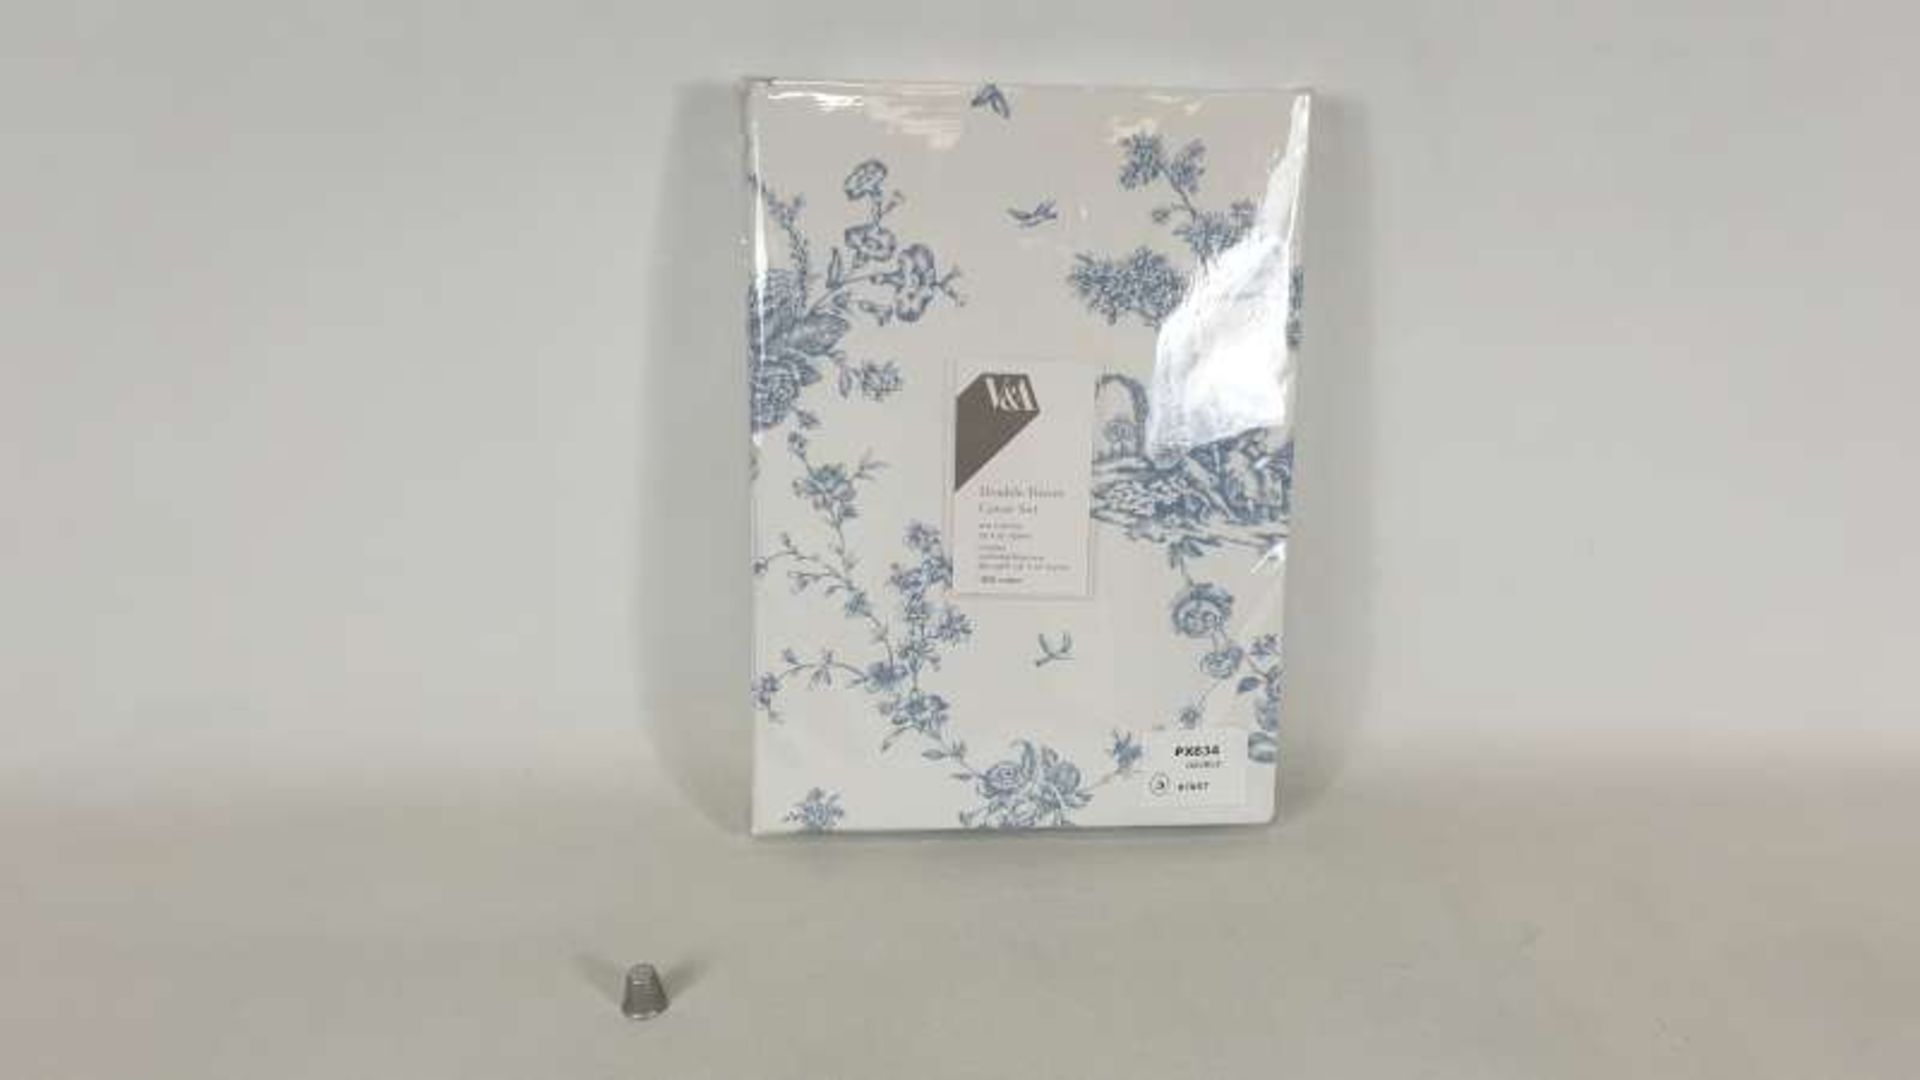 14 X V&A GARDEN OF LOVE DOUBLE DUVET COVER SETS IN 2 BOXES